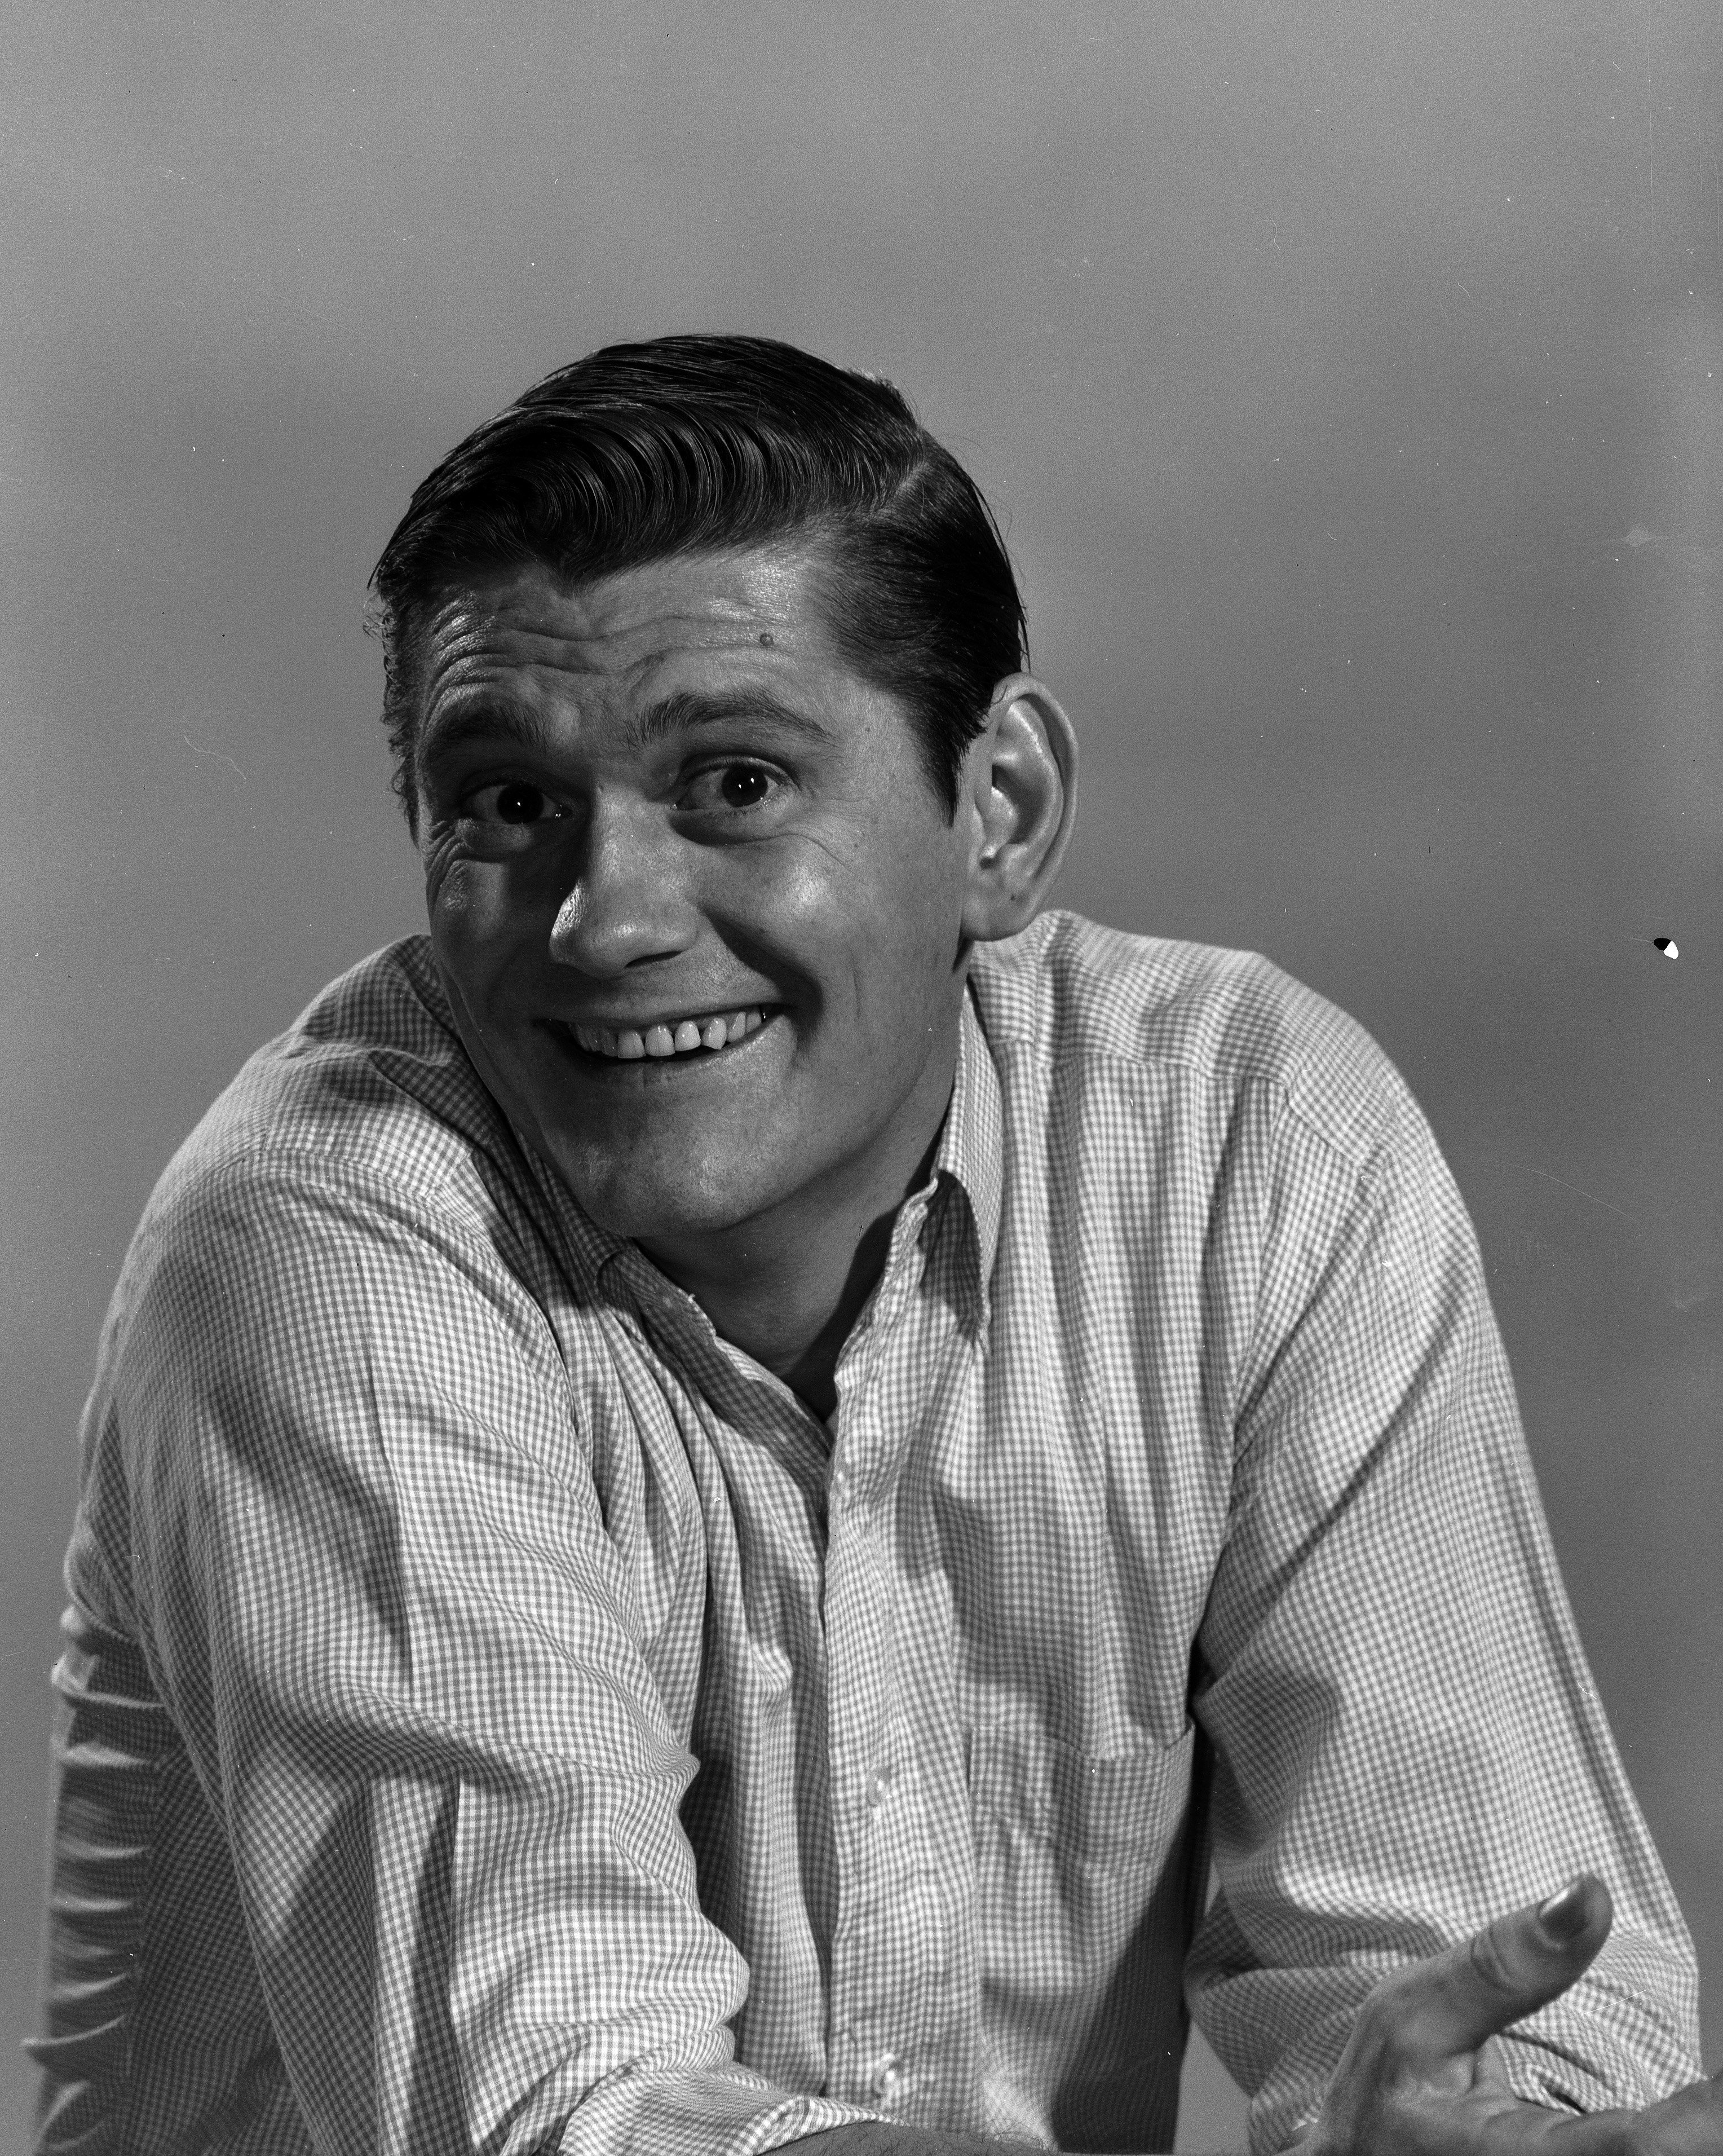 Dick York starring as Darrin Stephens on the TV program "Bewitched" on May 18, 1965 | Photo: Getty Images